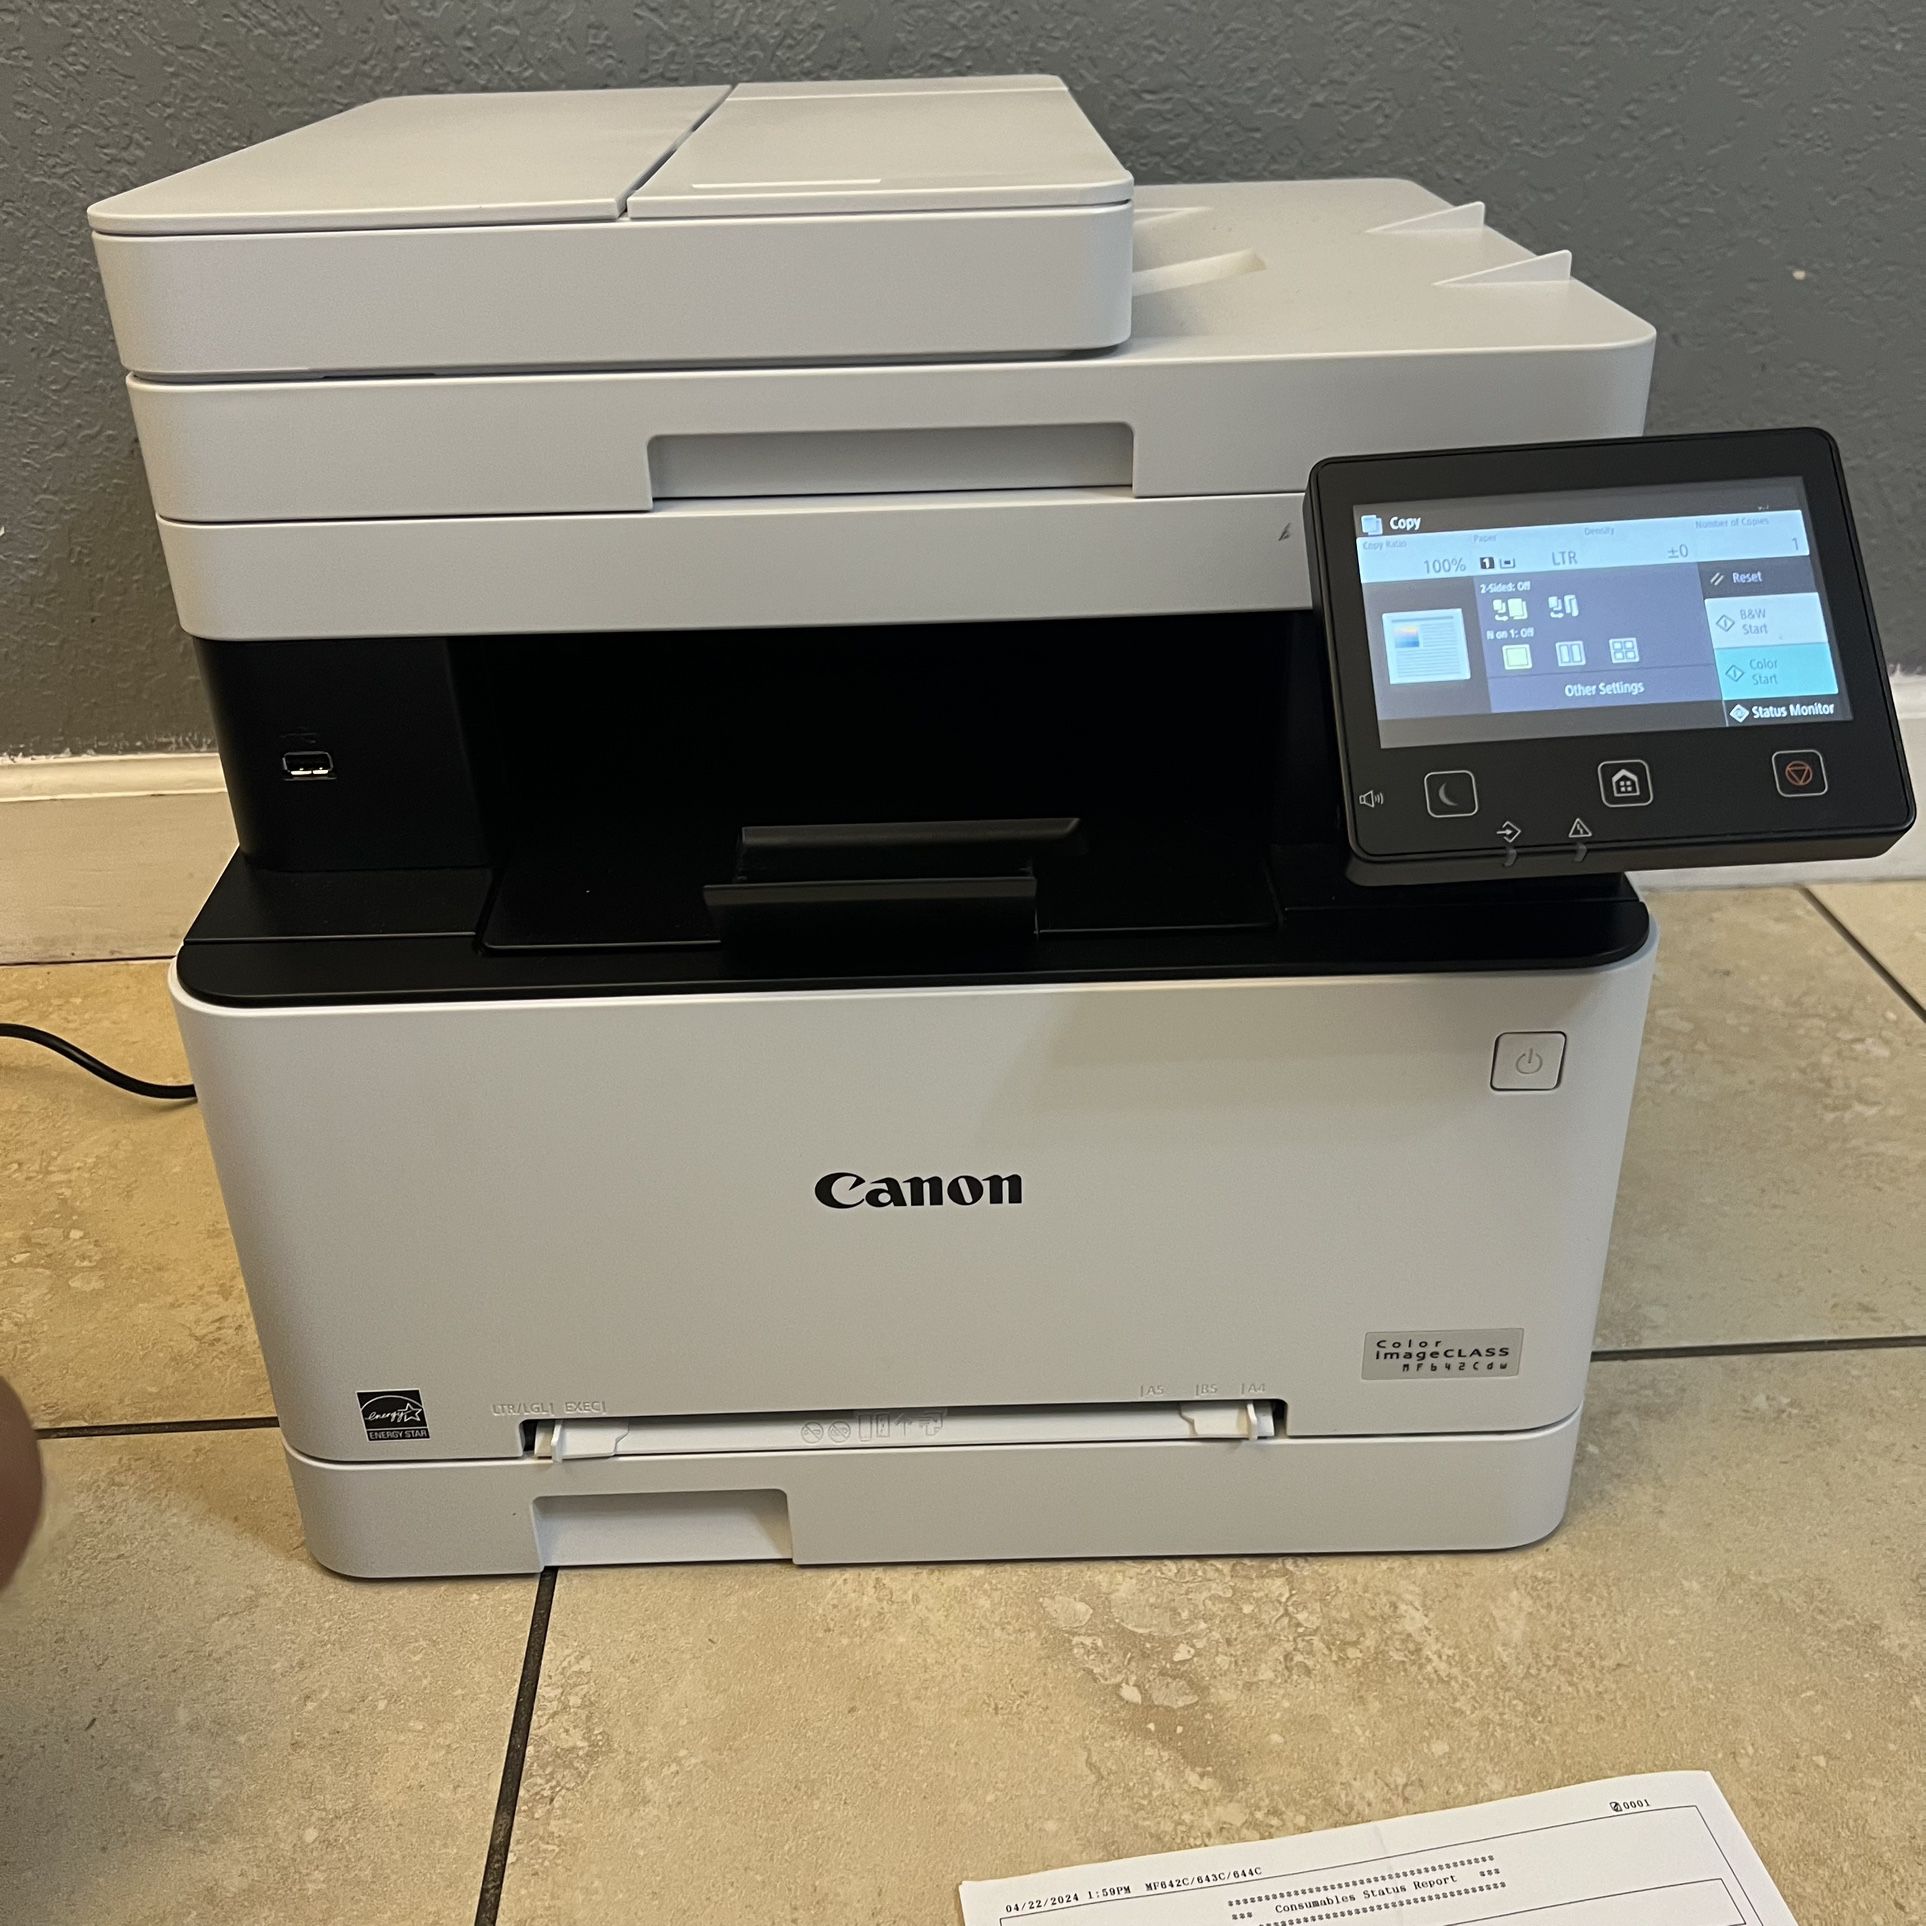 Canon MF642CDW Color ImageCLASS All-in-One Wireless Laser Printer Scanner